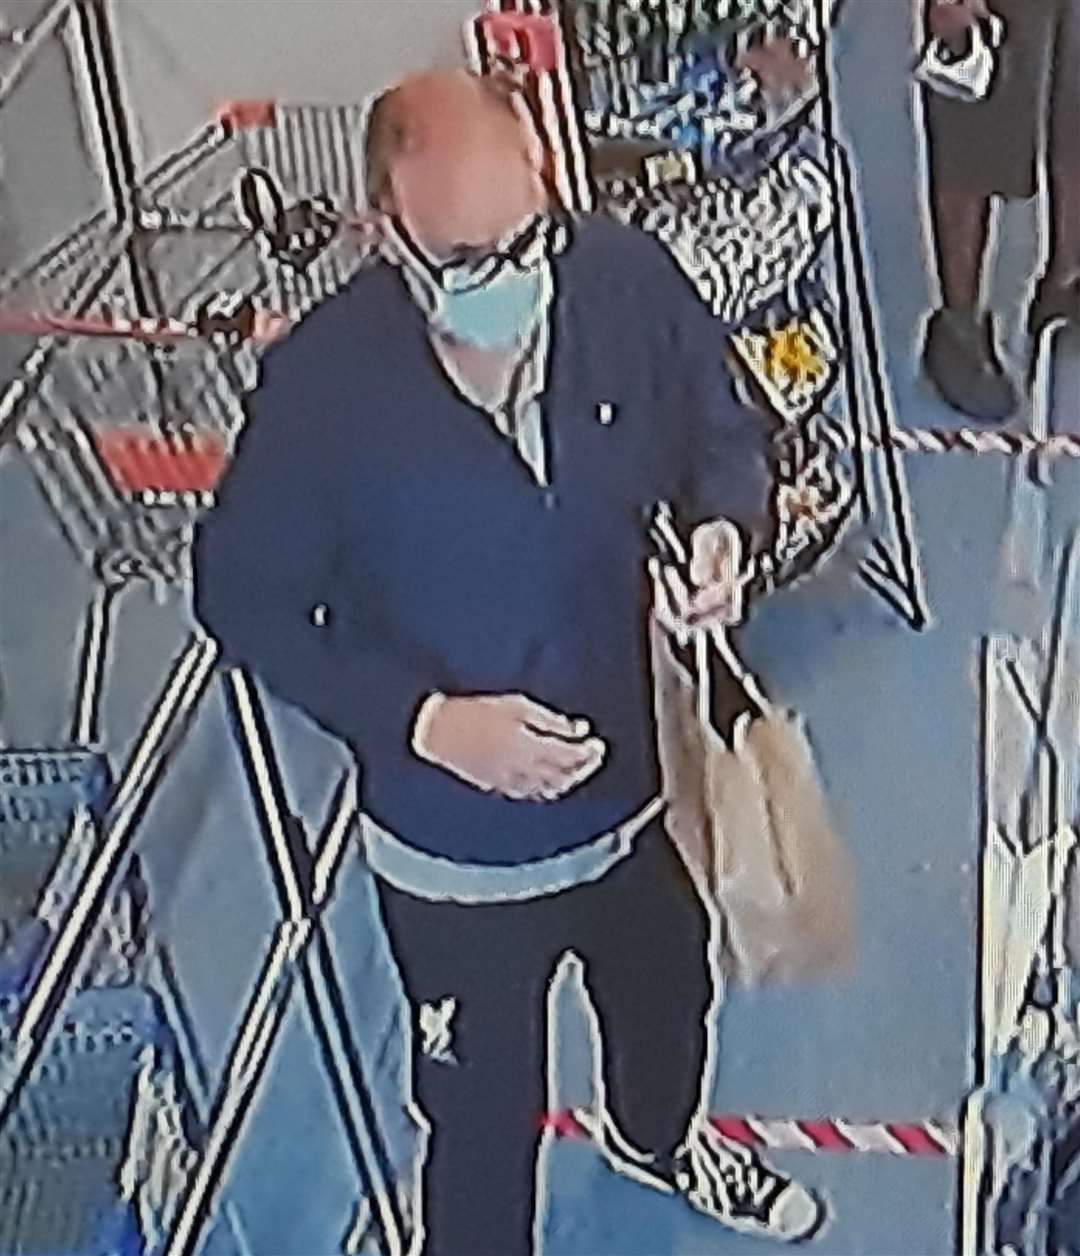 CCTV shows the last known image of missing man Anthony Kaila